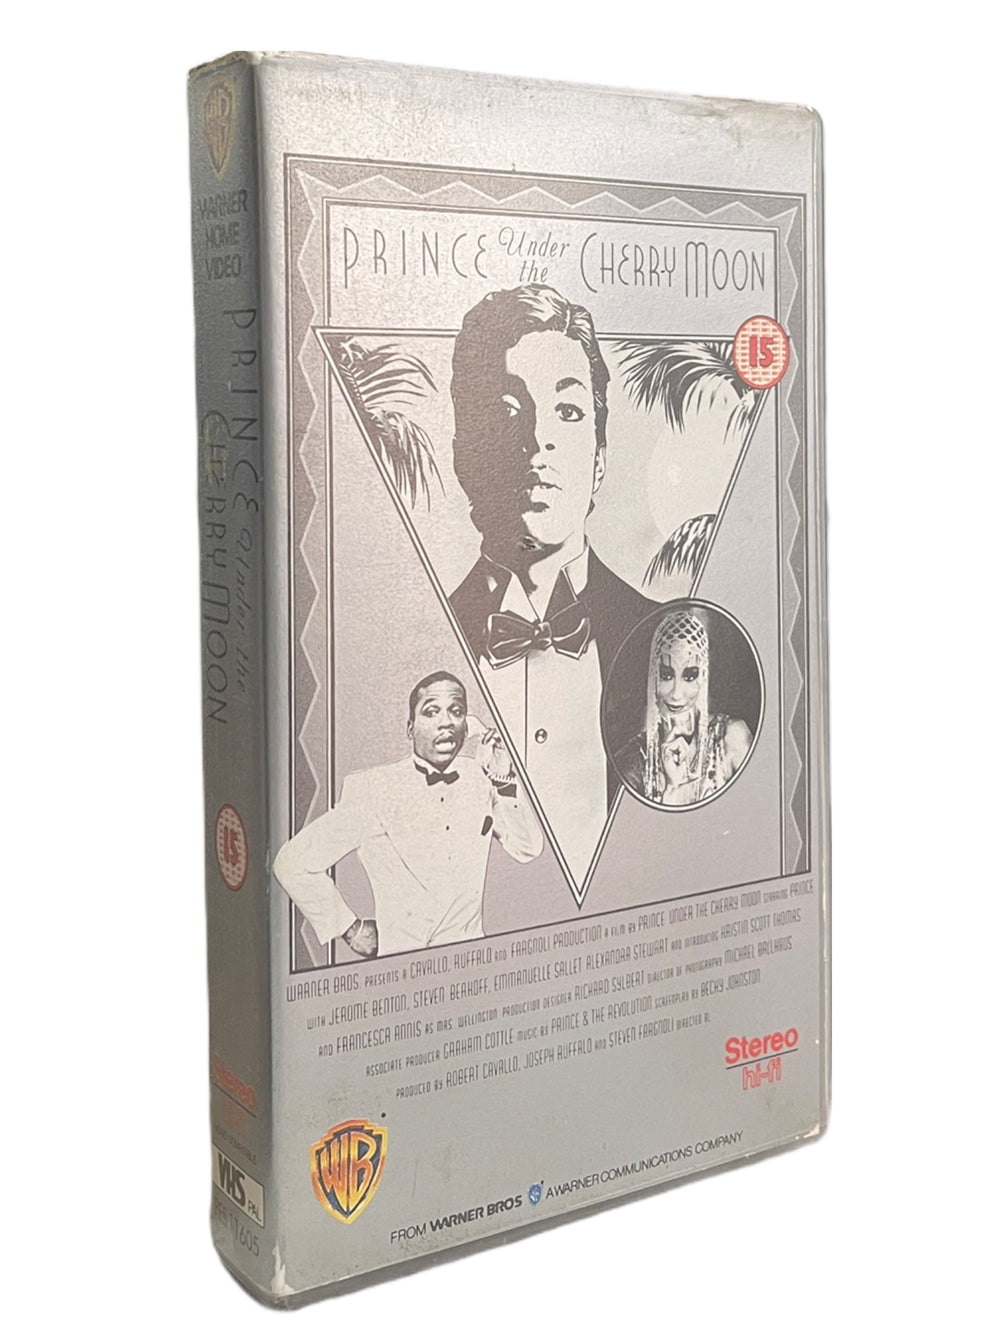 Prince – Under The Cherry Moon VHS Video Cassette